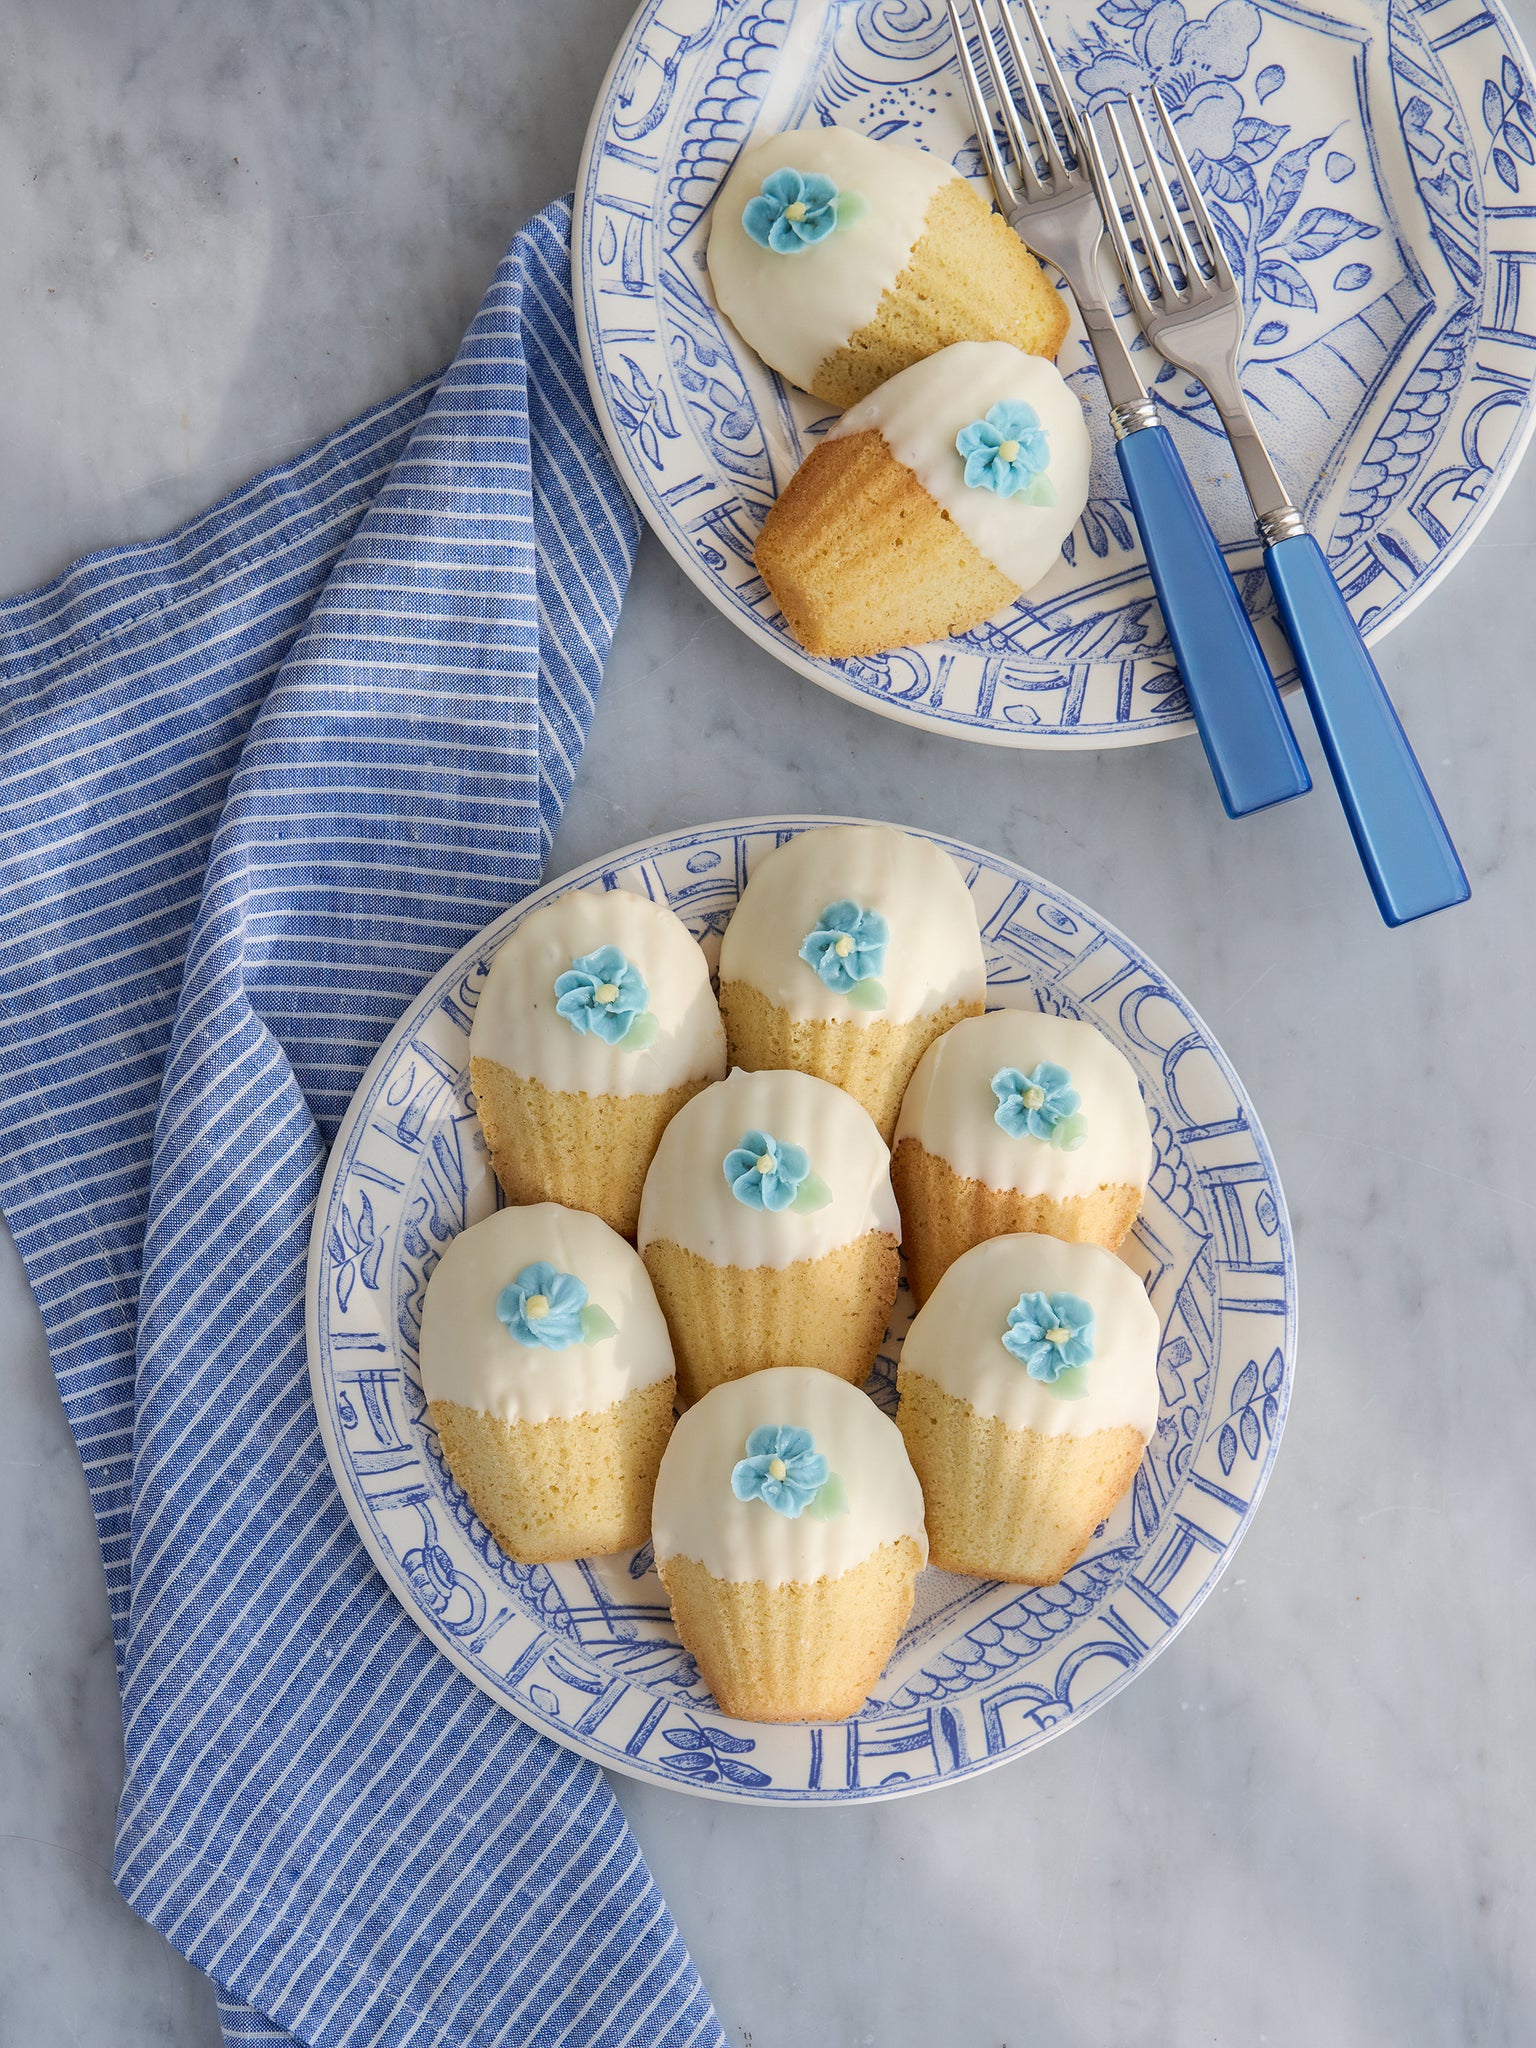 Forget-Me-Not Madeleines|Weston Table